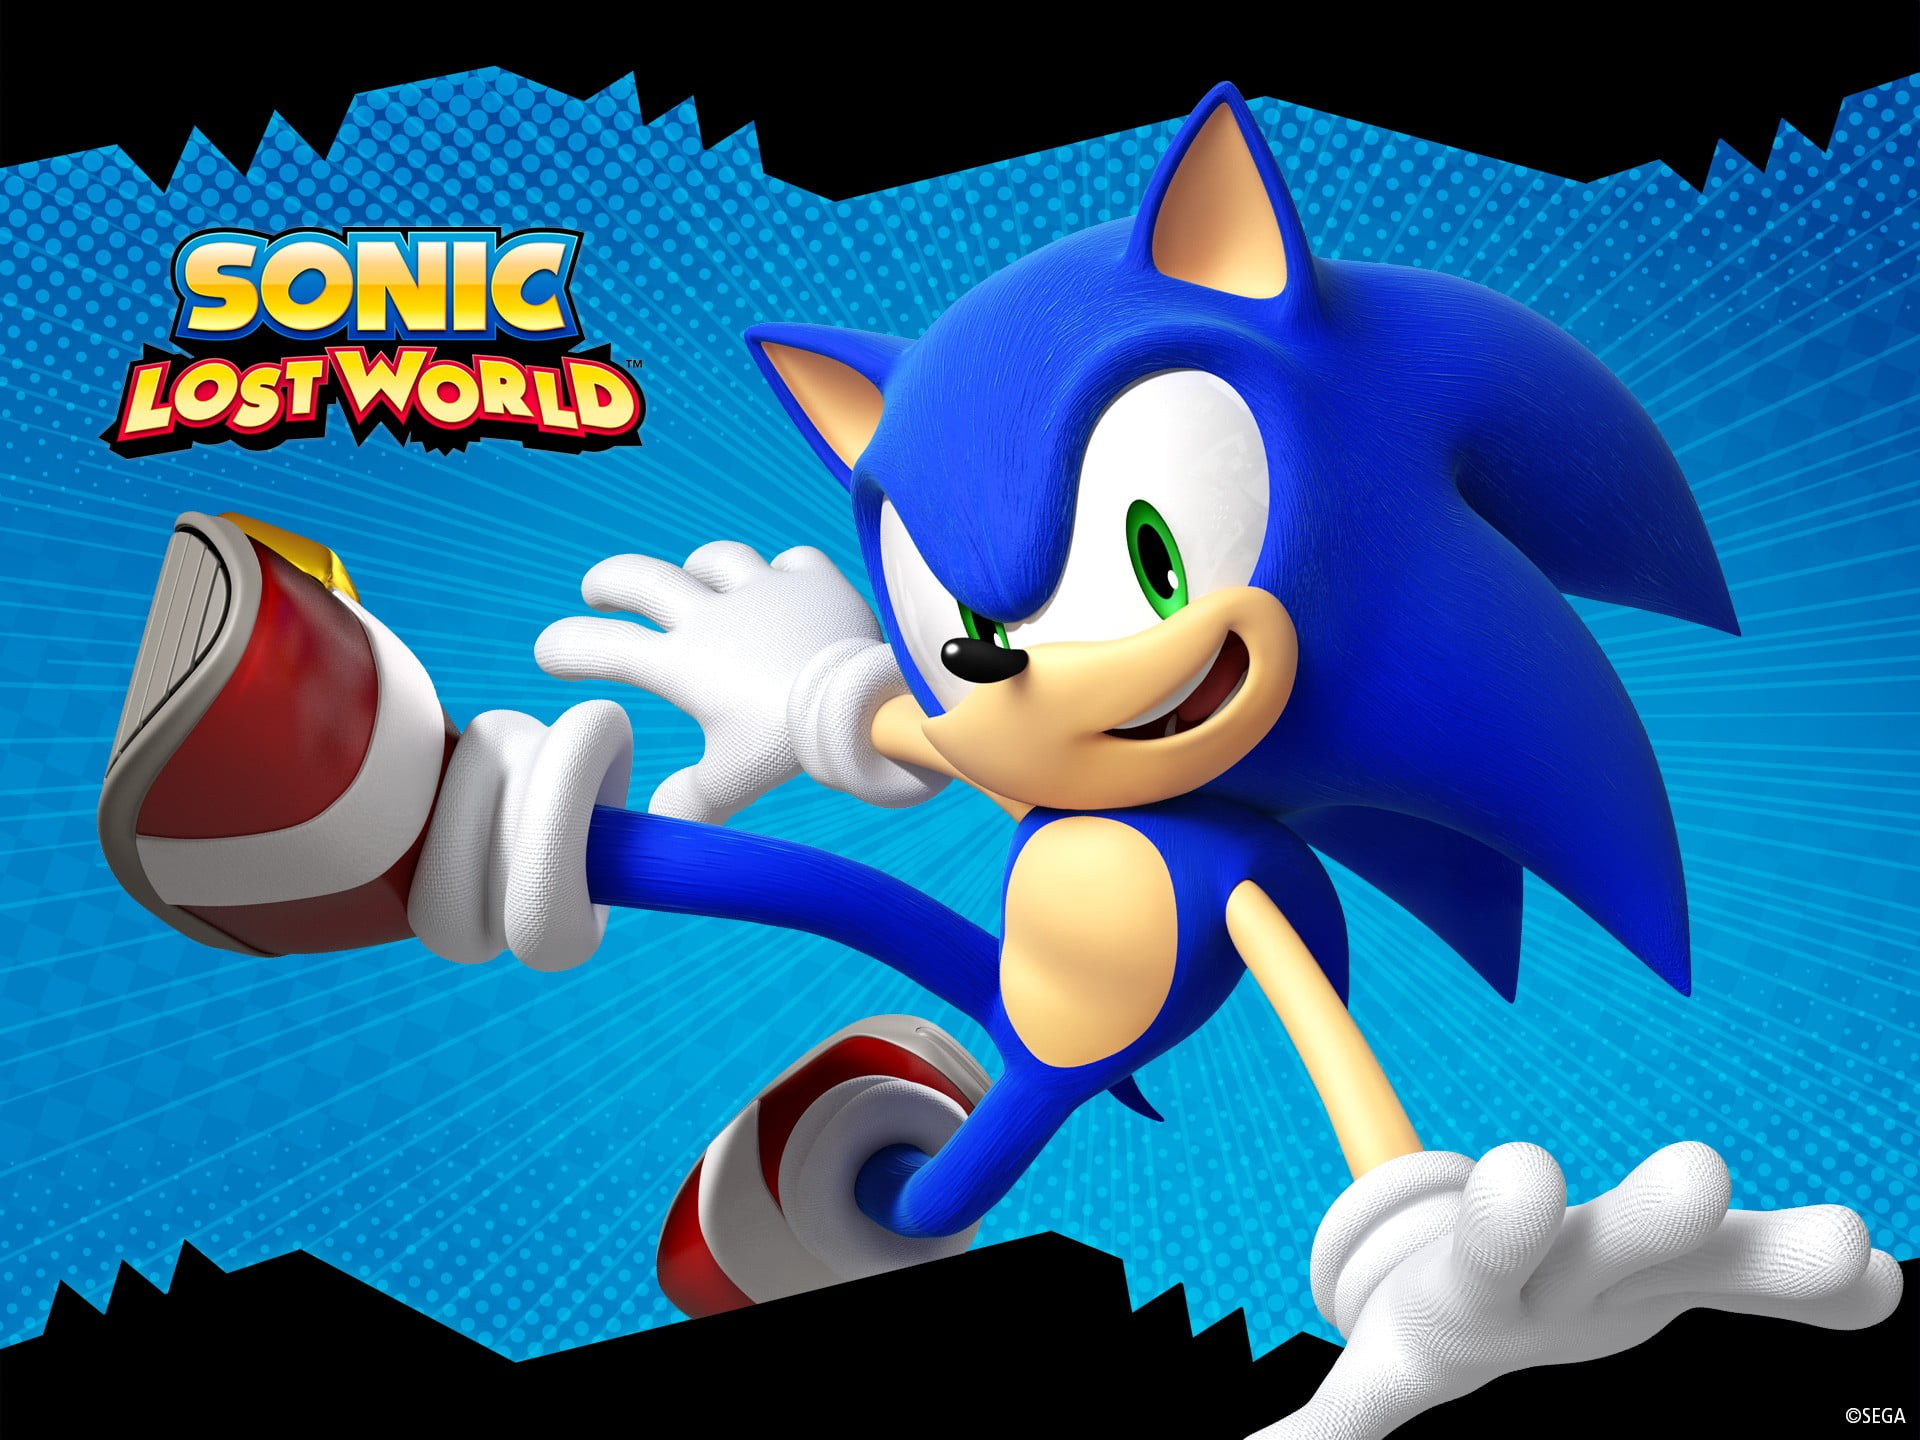 Wallpaper Sonic Lost World, Sonic The Hedgehog, Sonic, Game